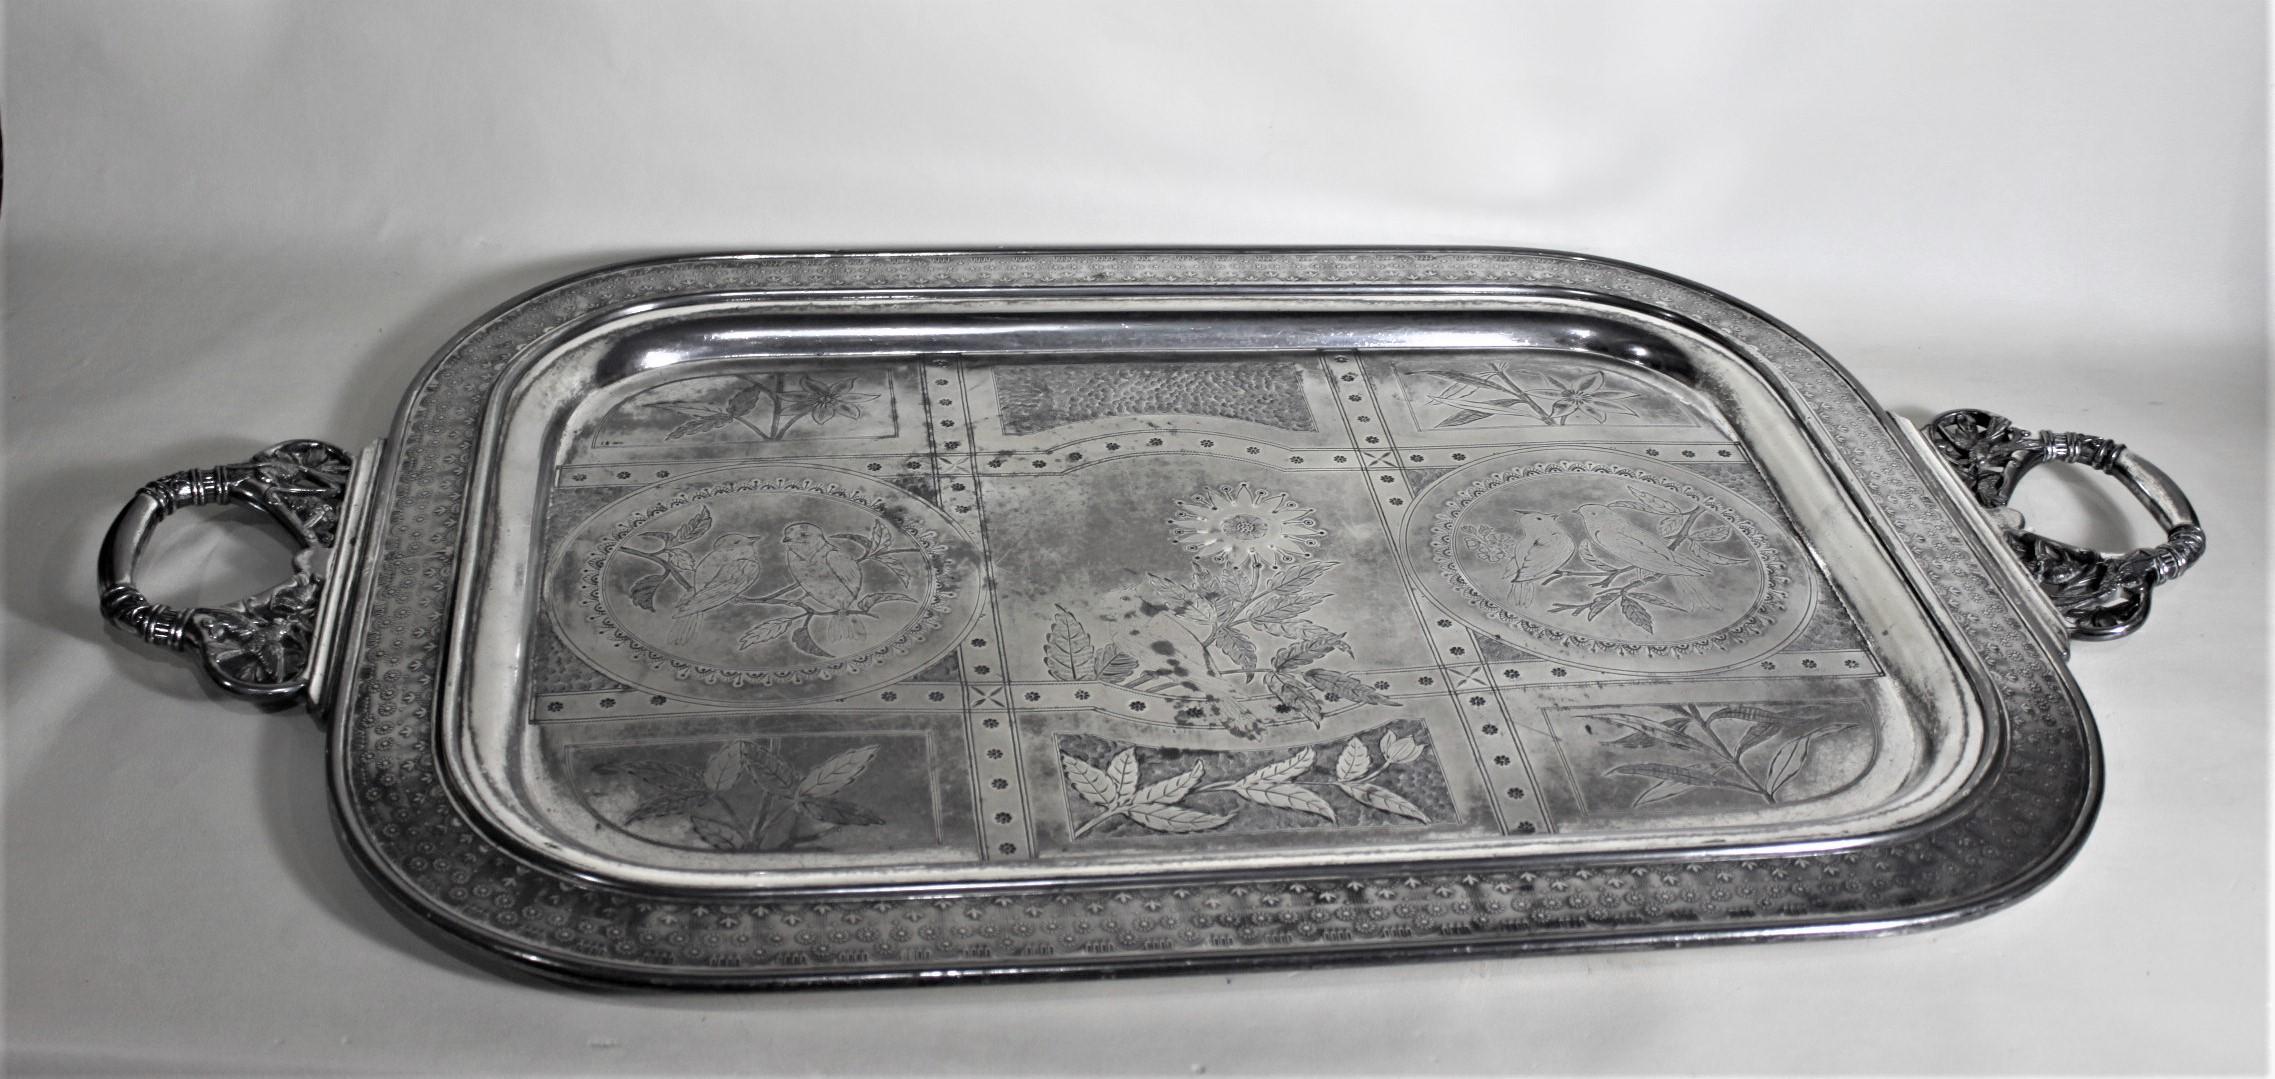 This very large and substantial silver plated serving tray is unsigned, but presumed to have been made in the United States in approximately 1900 in the period Aesthetic Movement style. The tray has a very ornate stylized floral border with ornate